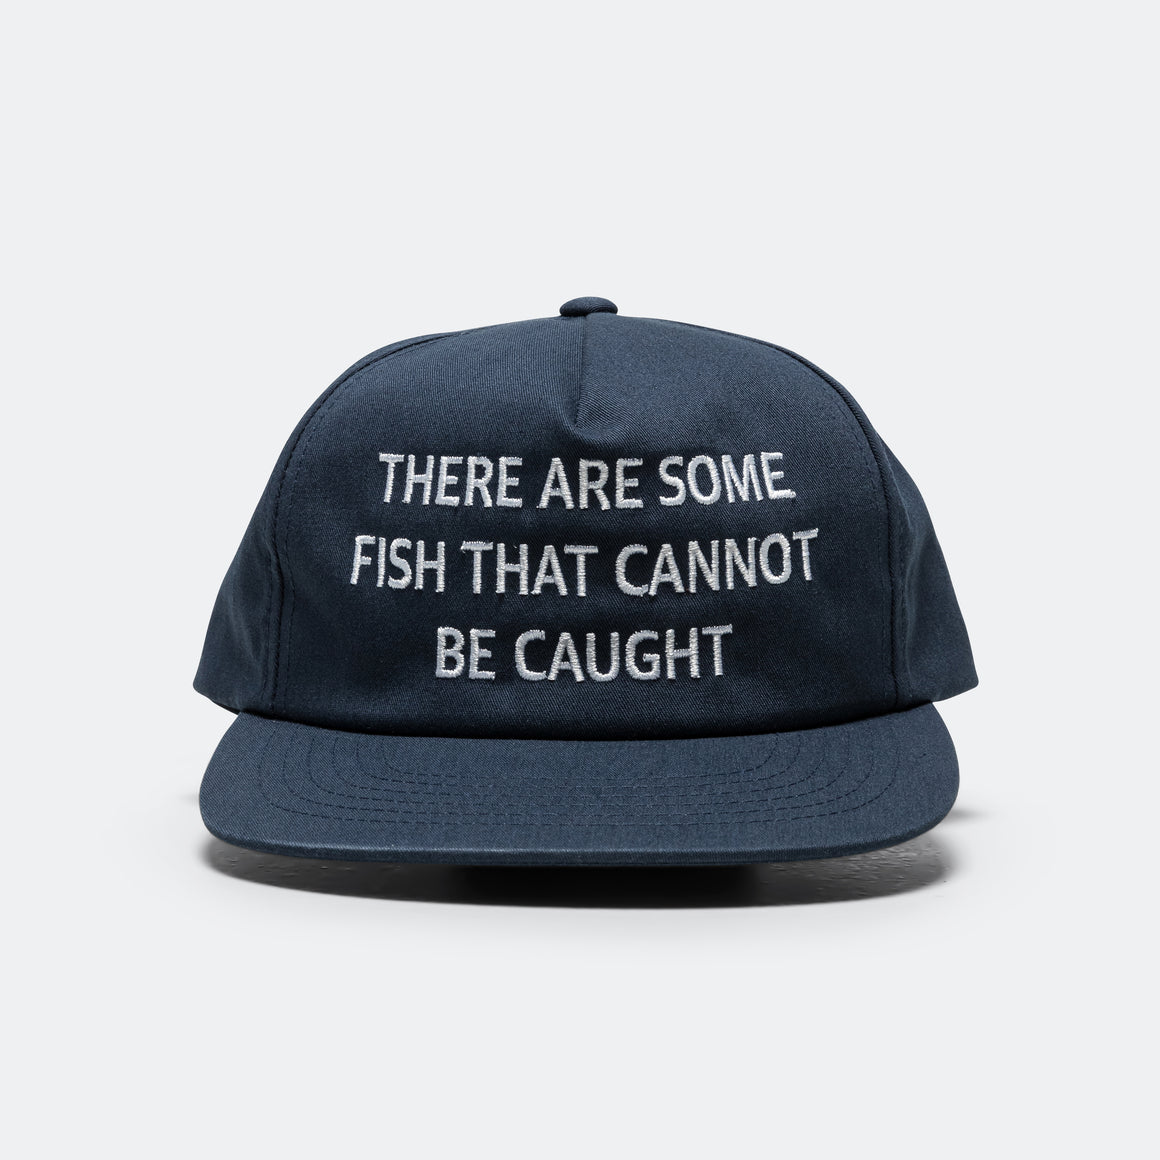 Western Hydrodynamic Research - Can't Catch All Fish Hat - Navy - UP THERE